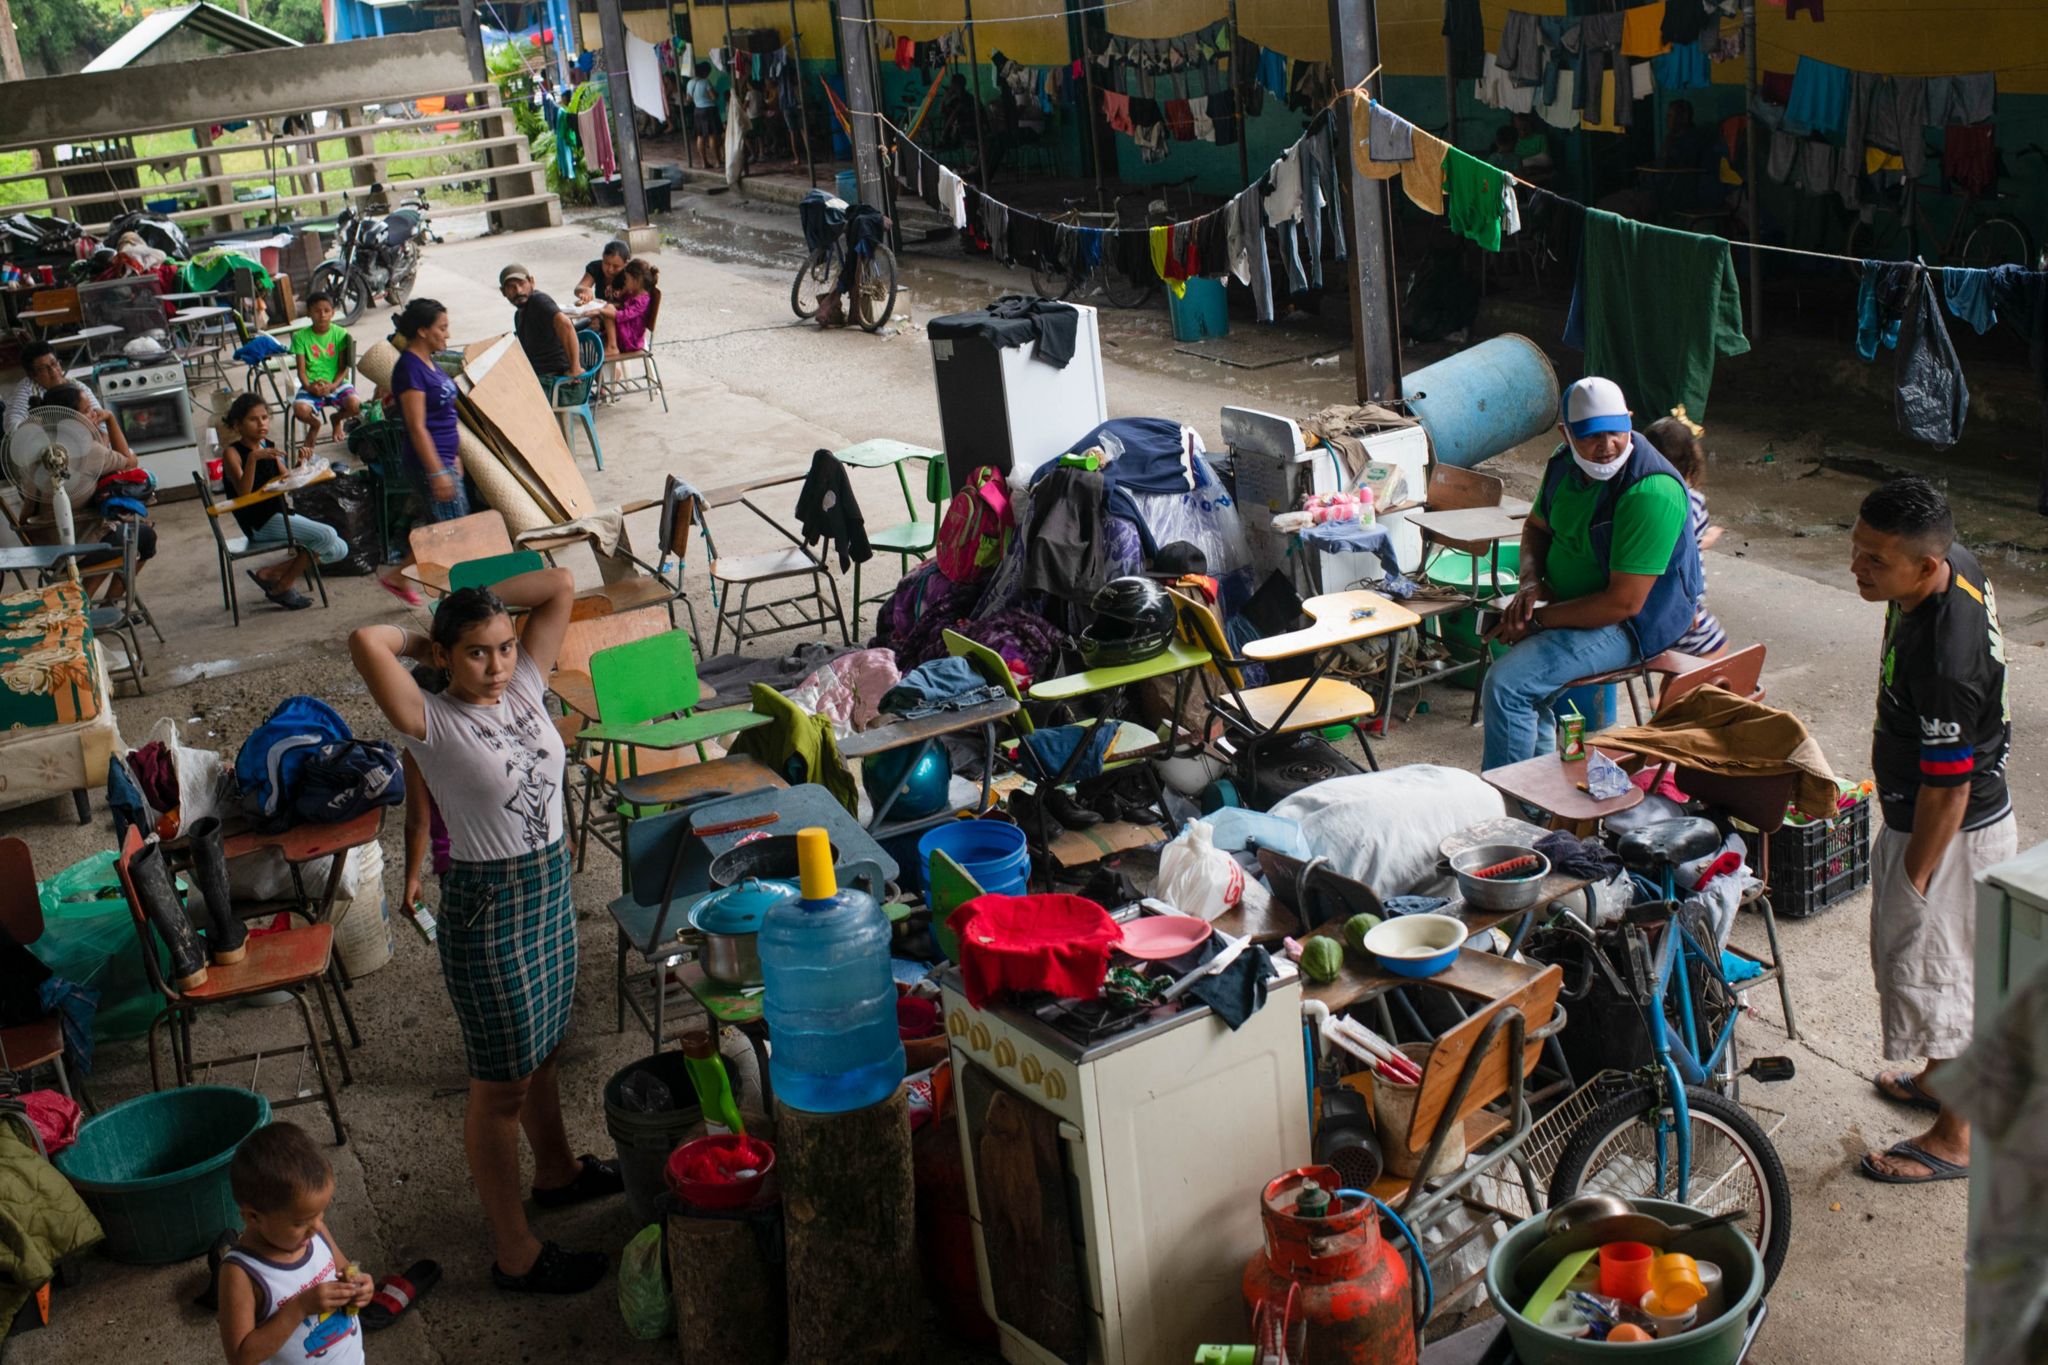 A school in San Pedro Sula has been turned into a shelter